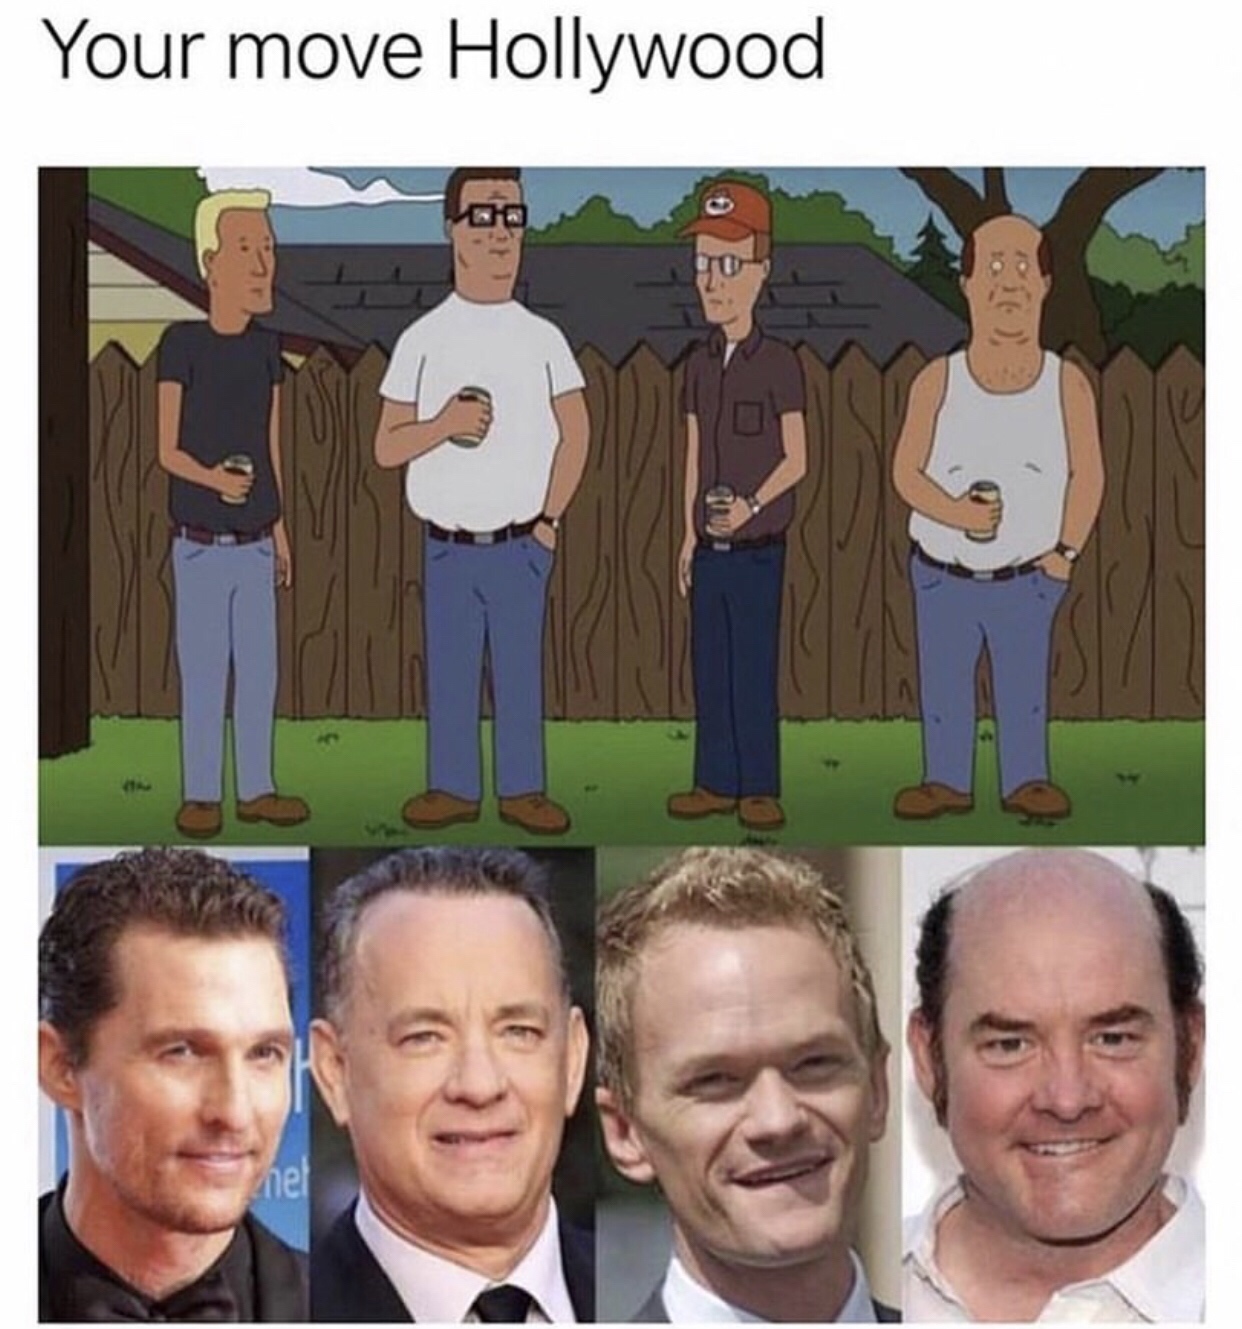 king of the hill hollywood meme - Your move Hollywood